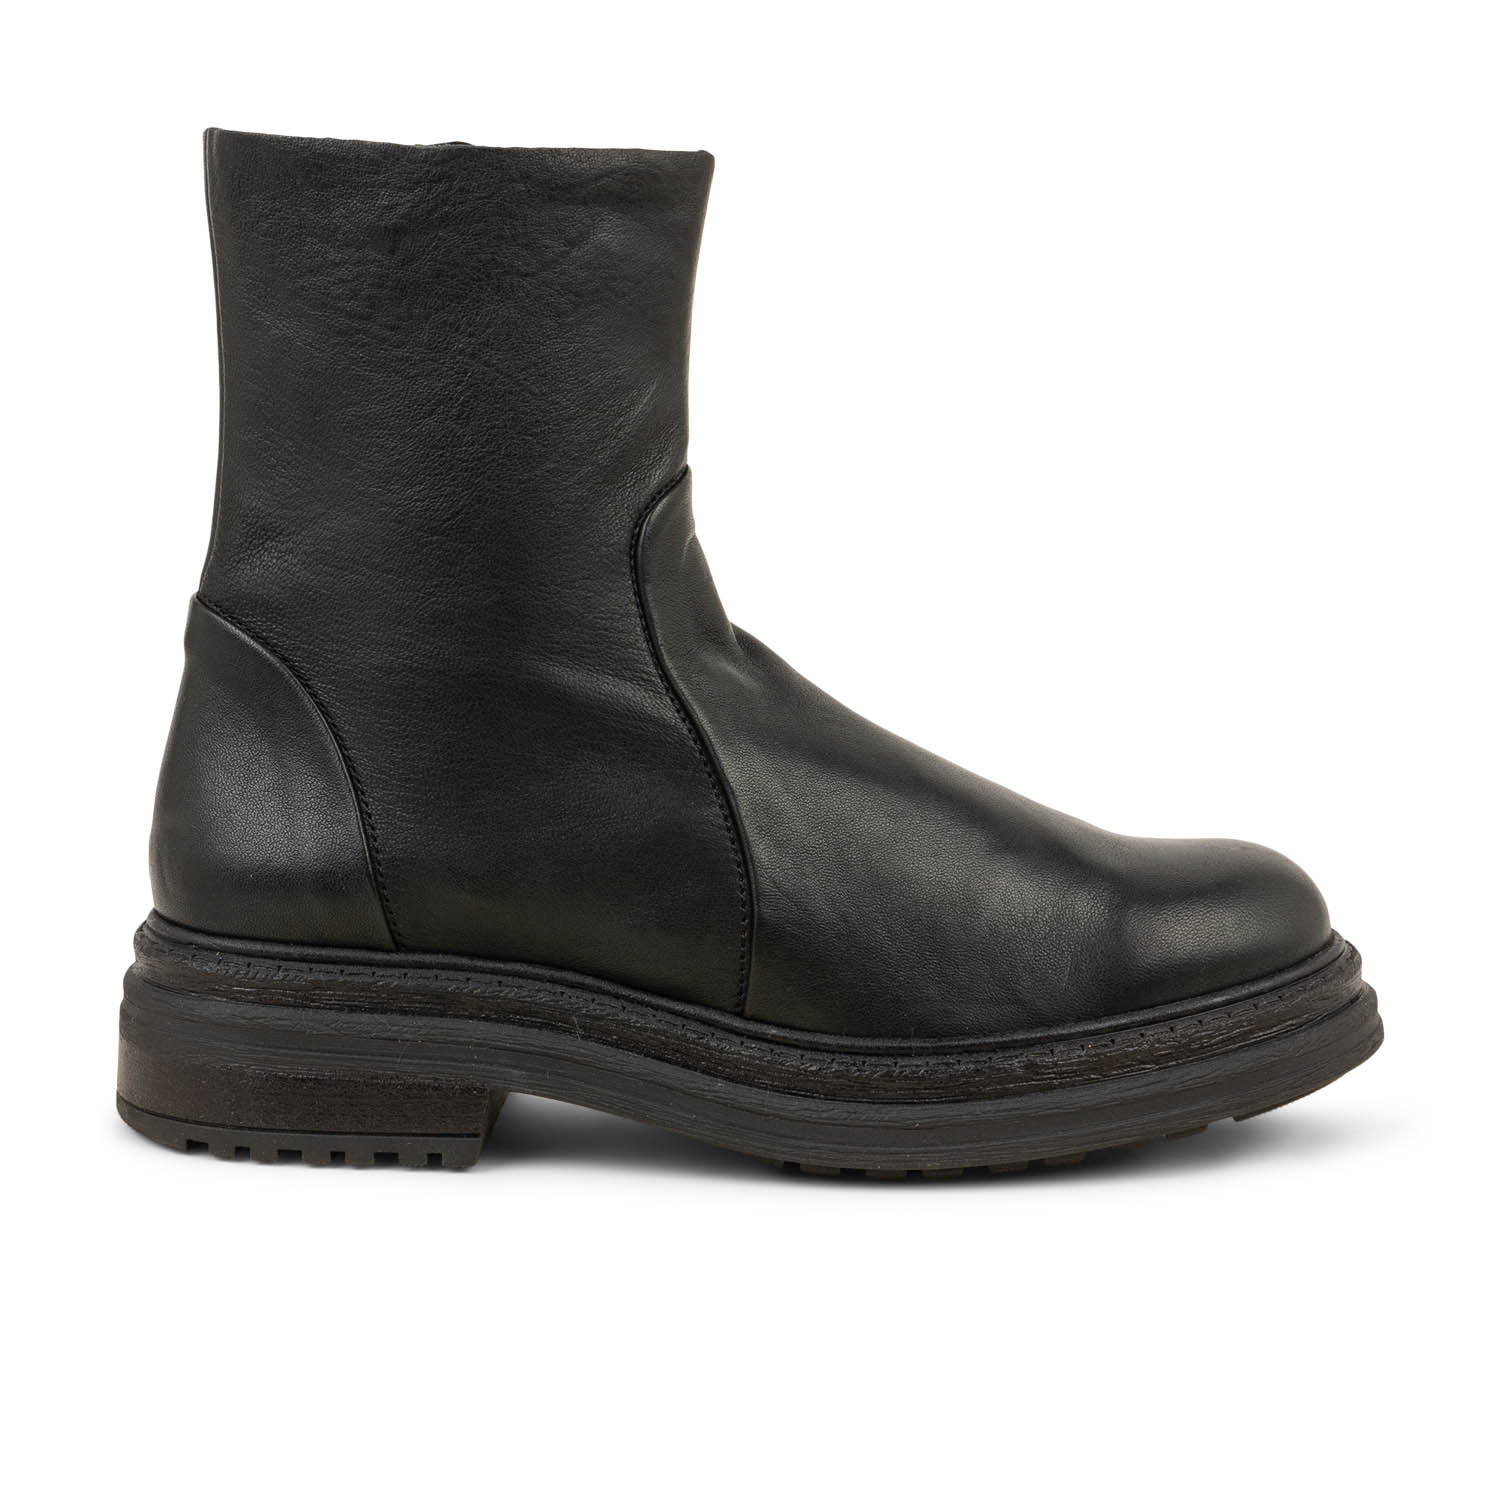 01 - PULLY - ALIWELL - Boots et bottines - Cuir